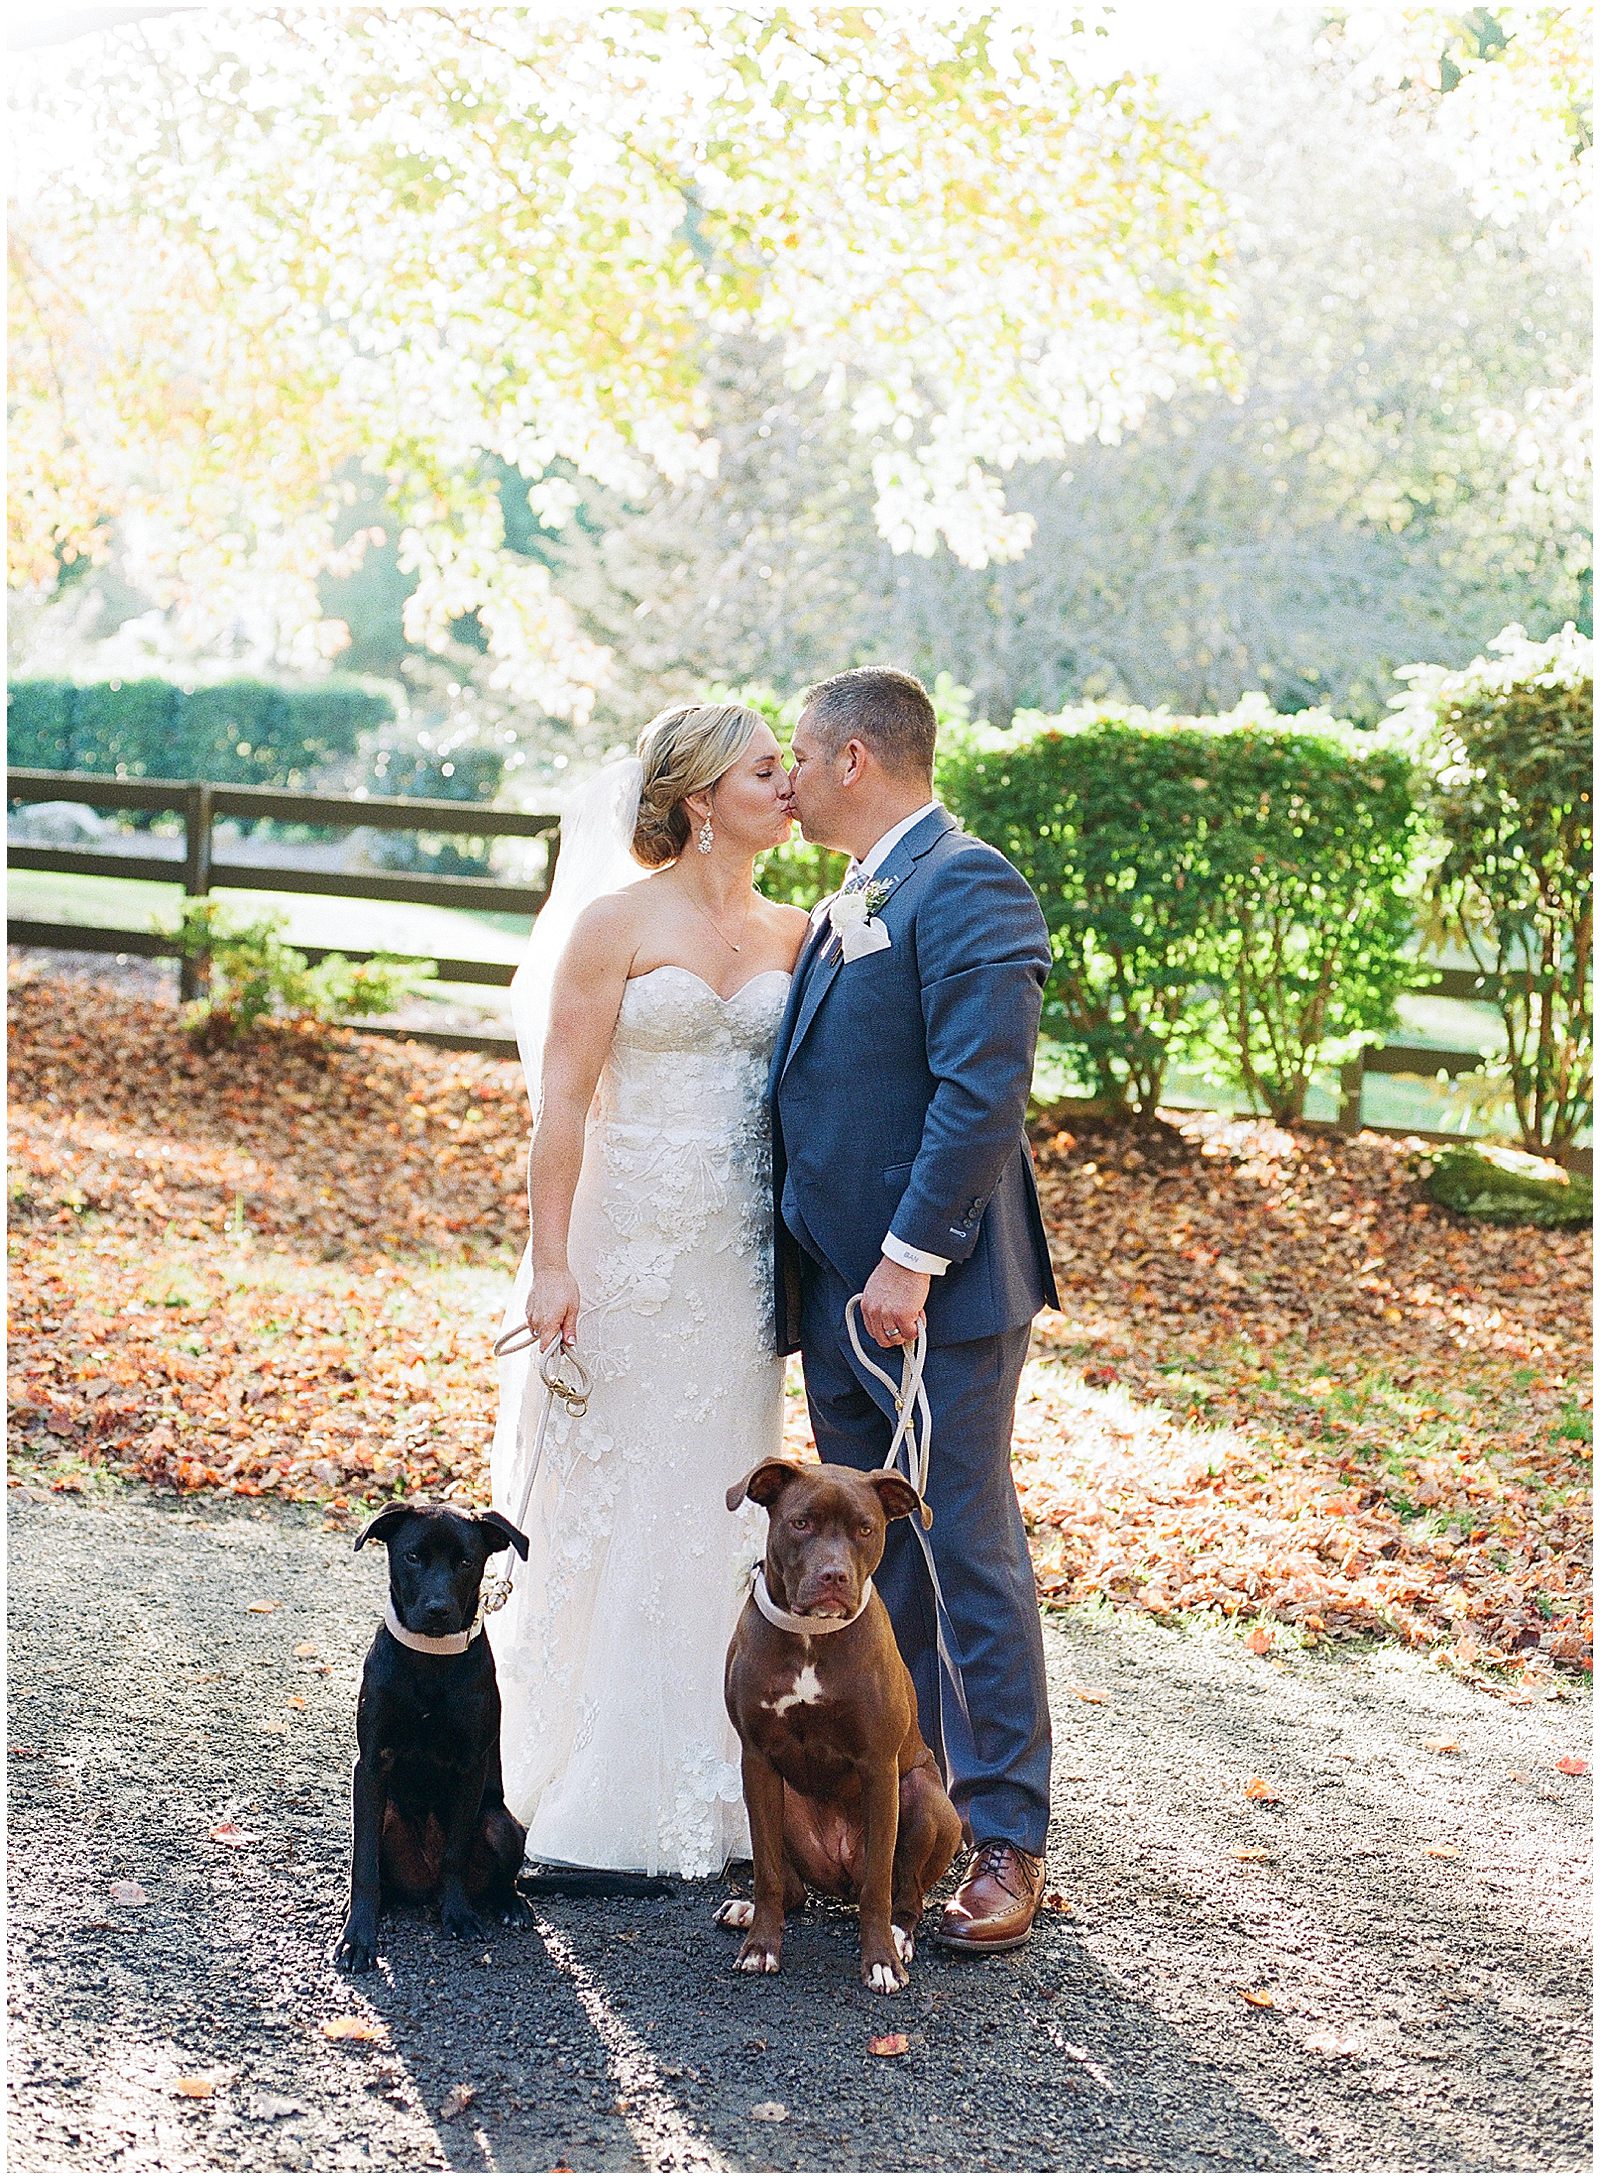 Fall Hawkesdene Wedding Bride and Groom Kissing with Dogs Photo